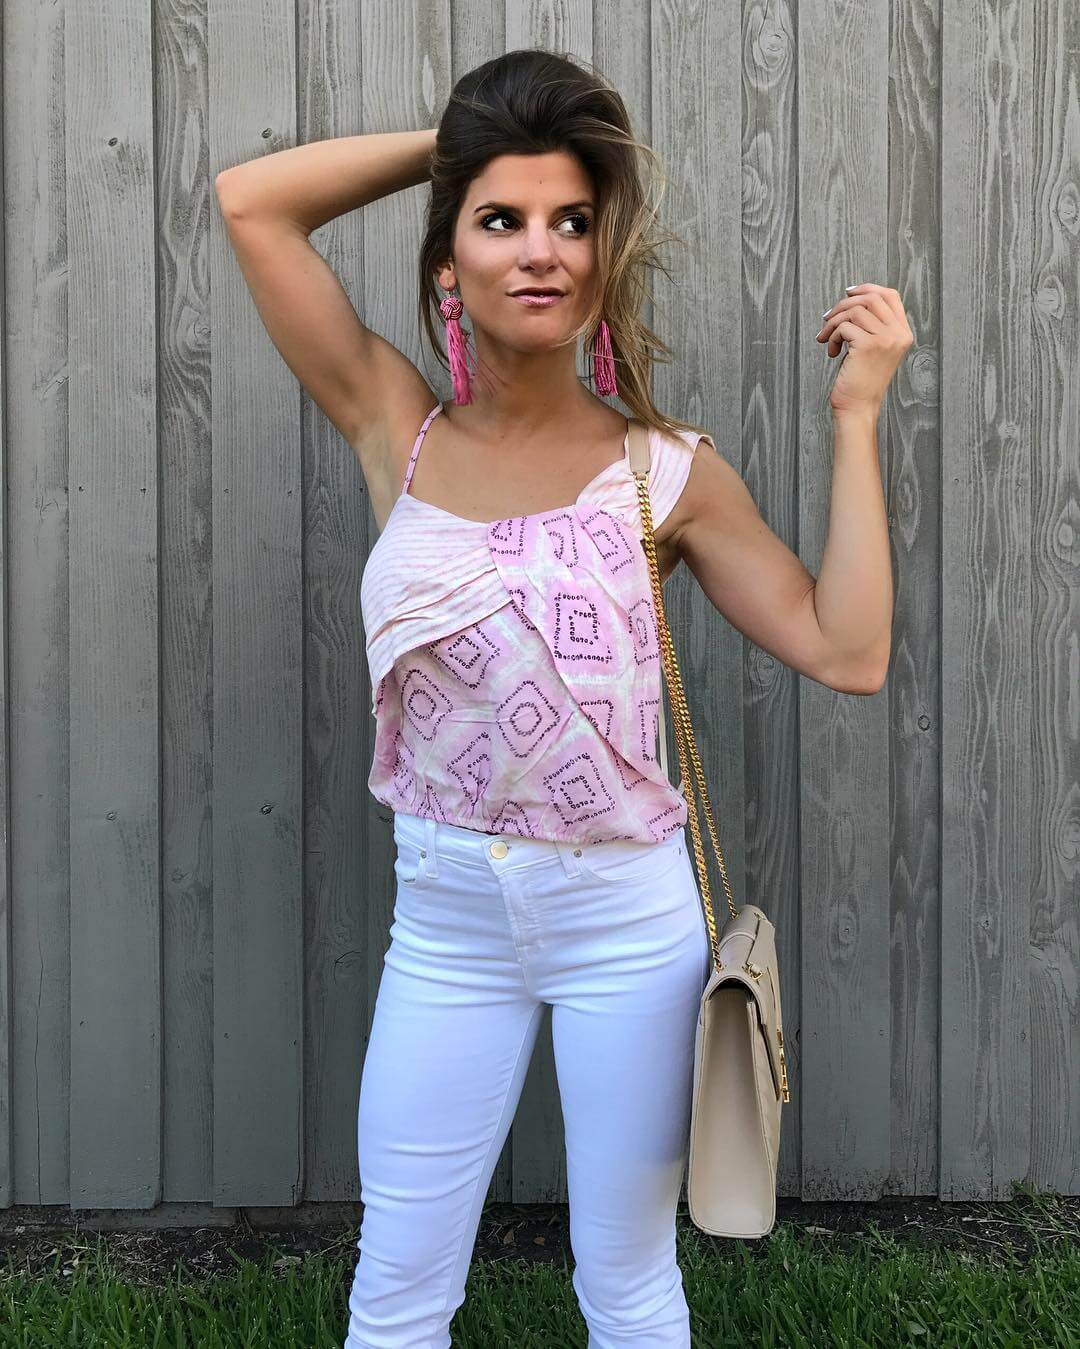 brighton keller wearing asymmetrical pink printed top with white jeans and pink earrings 